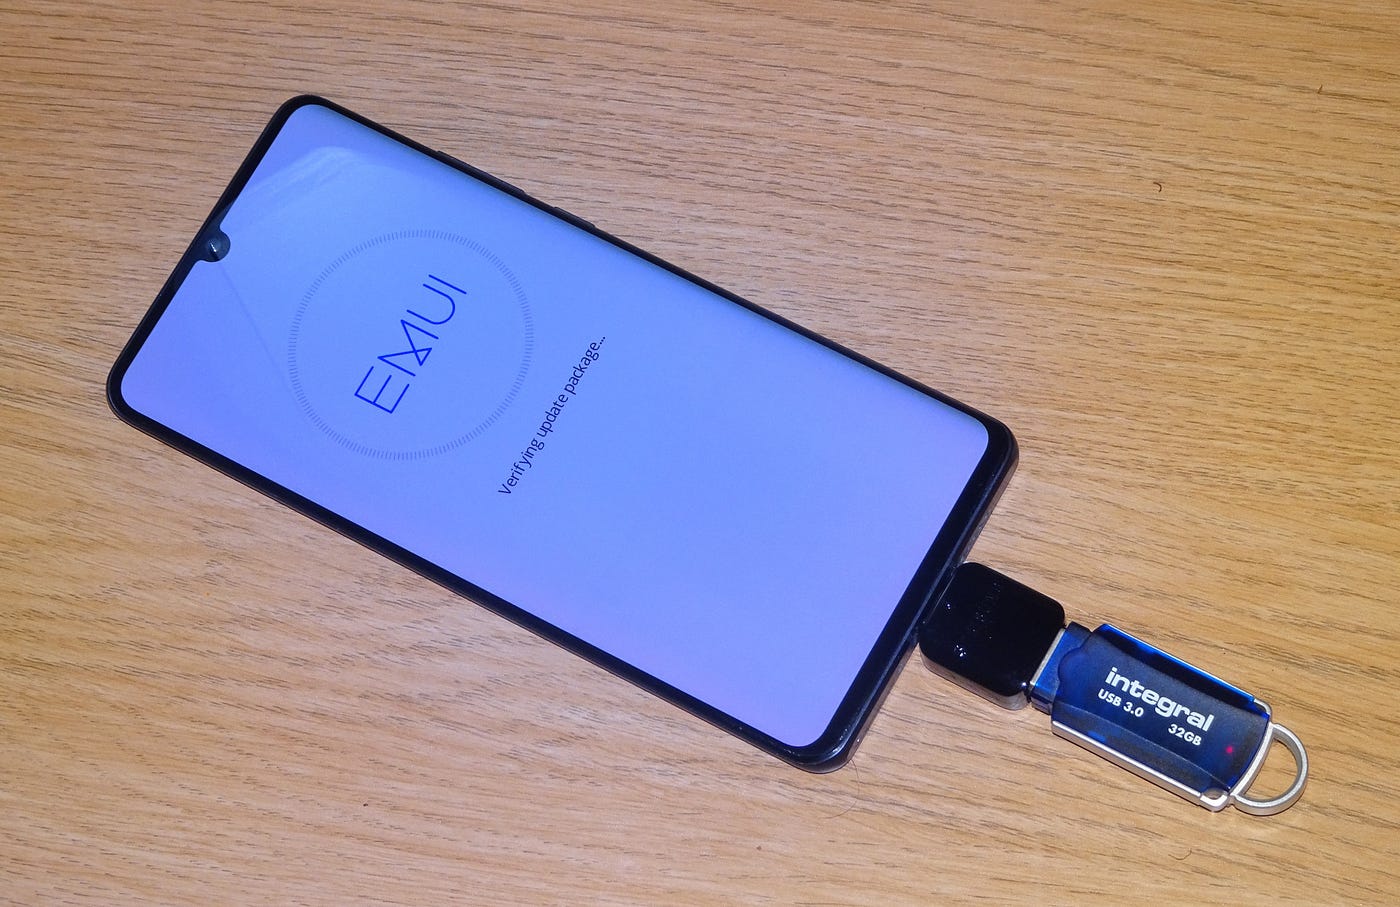 How to: Huawei P30 Pro EMUI 10 'dload' upgrade